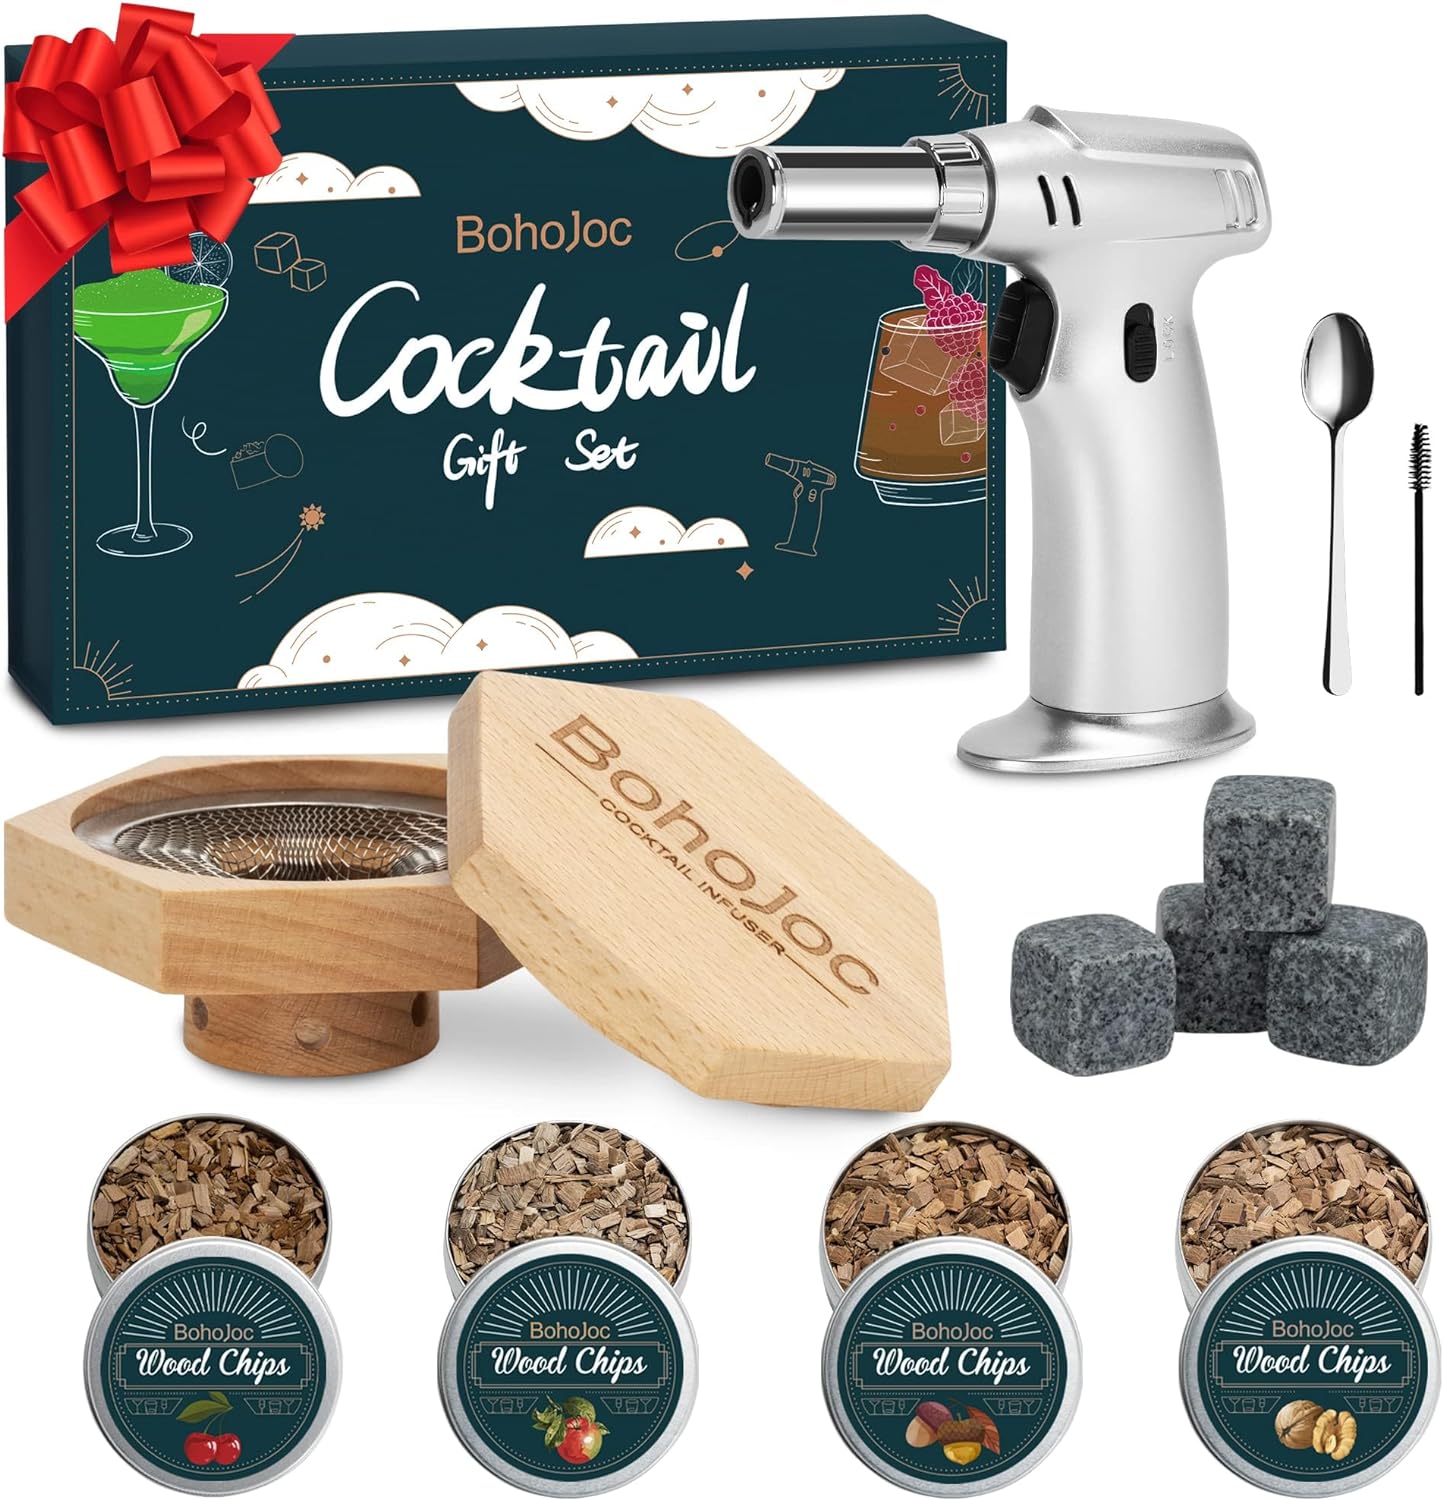 New Gifts for Men/Dad/Boyfriend, Cocktail Smoker Kit with Torch & Whiskey Stones, Christmas Birthday Gifts for Men, Mens Gifts for Christmas, Prime Deals Today 2023, Black Deals 2023 (No Butane)